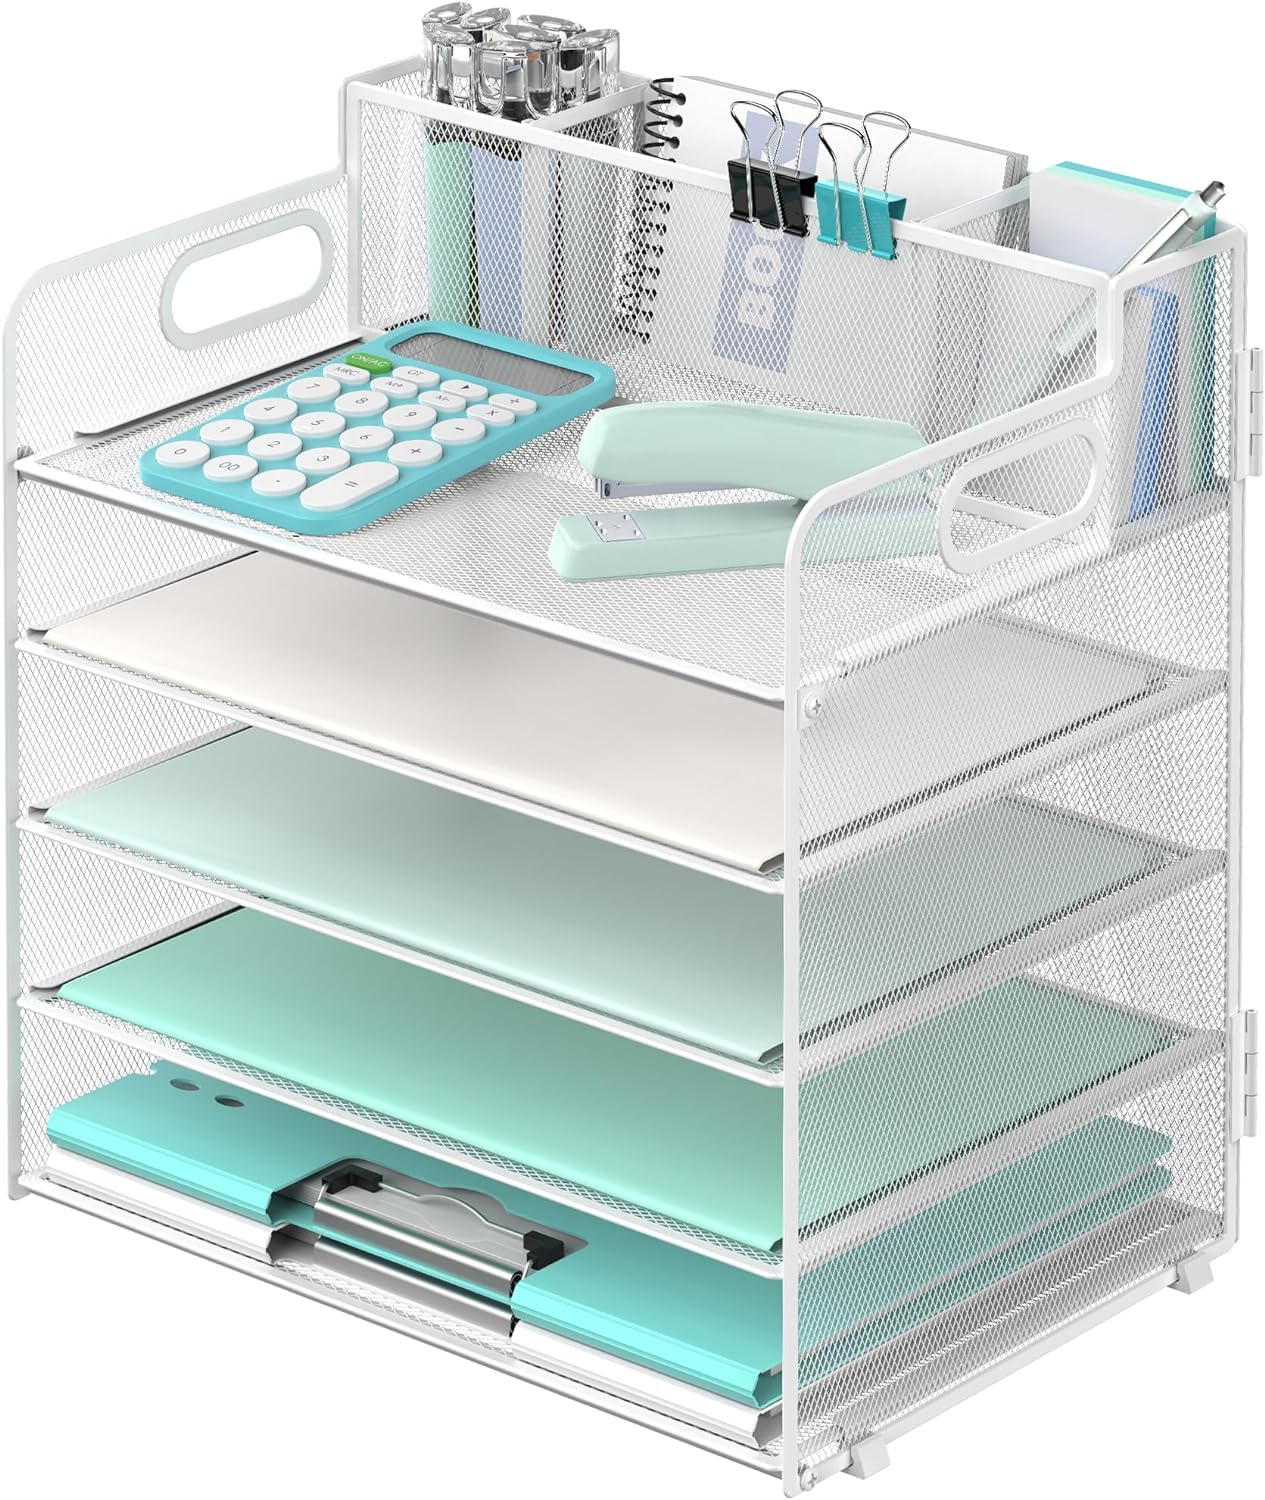 5 Trays Paper Organizer with 3 Pen Holders-Letter Tray Desk Organzier, Mesh Desk File Organizer with Handle, Paper Sorter for Office Organization (White)